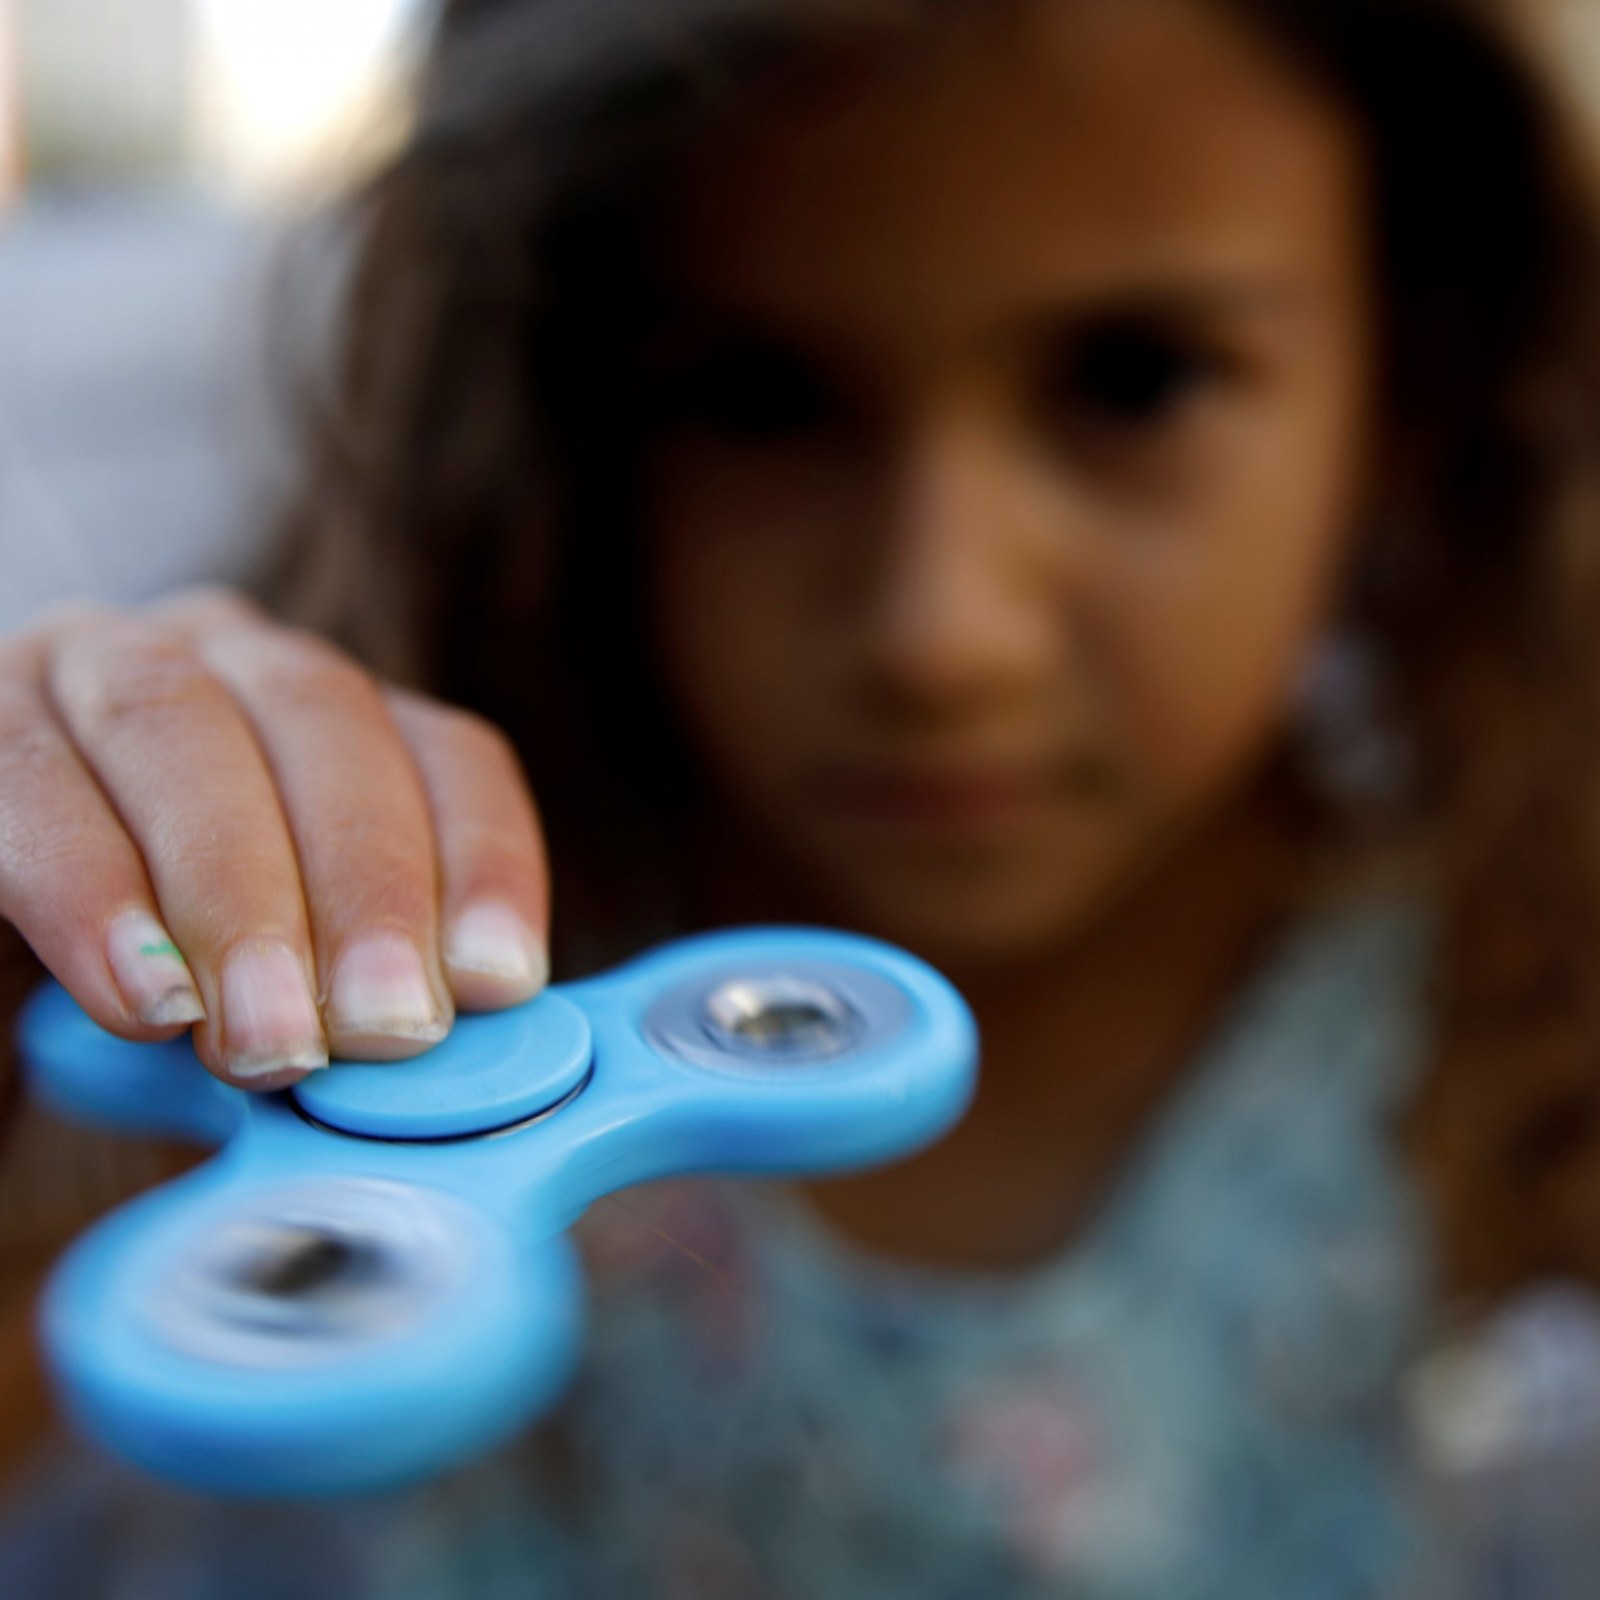 klokke Afdeling lyd Do Fidget Spinners Help Anxiety and ADHD? Experts Are Skeptical